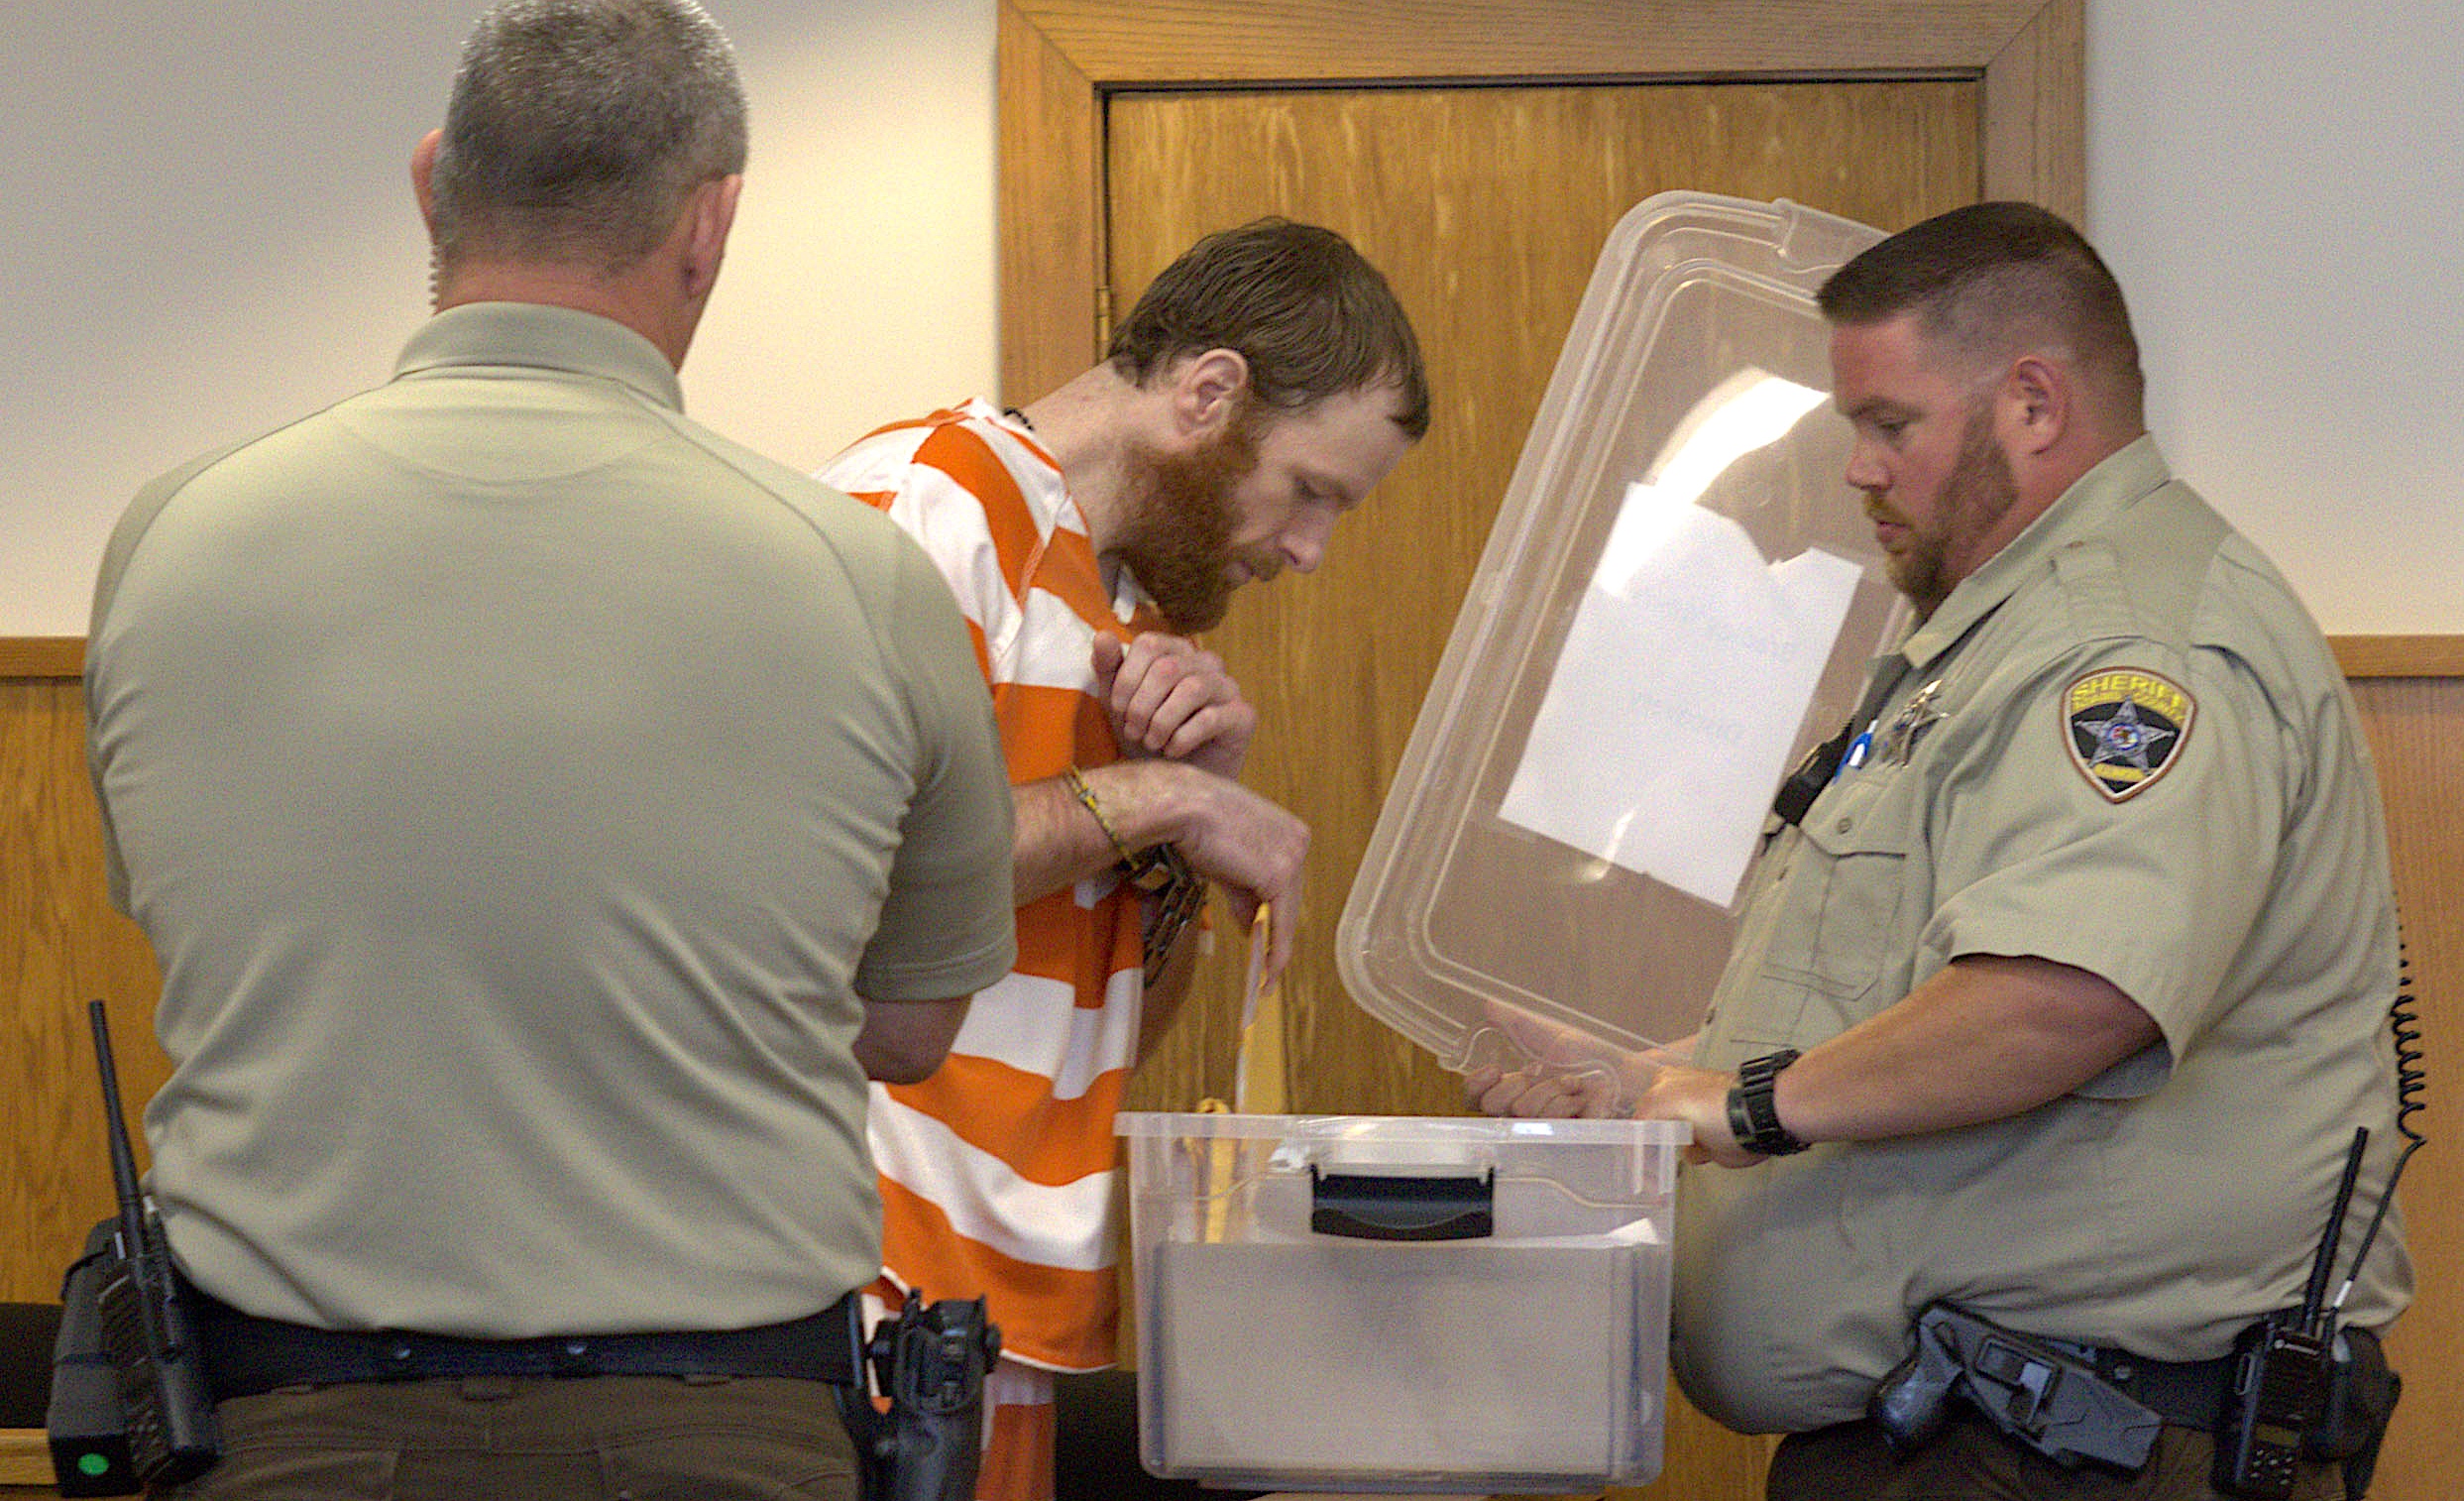 Bradley Yohn retrieves files under the watch of Adams County Court security officers during a motion hearing held Wednesday afternoon.